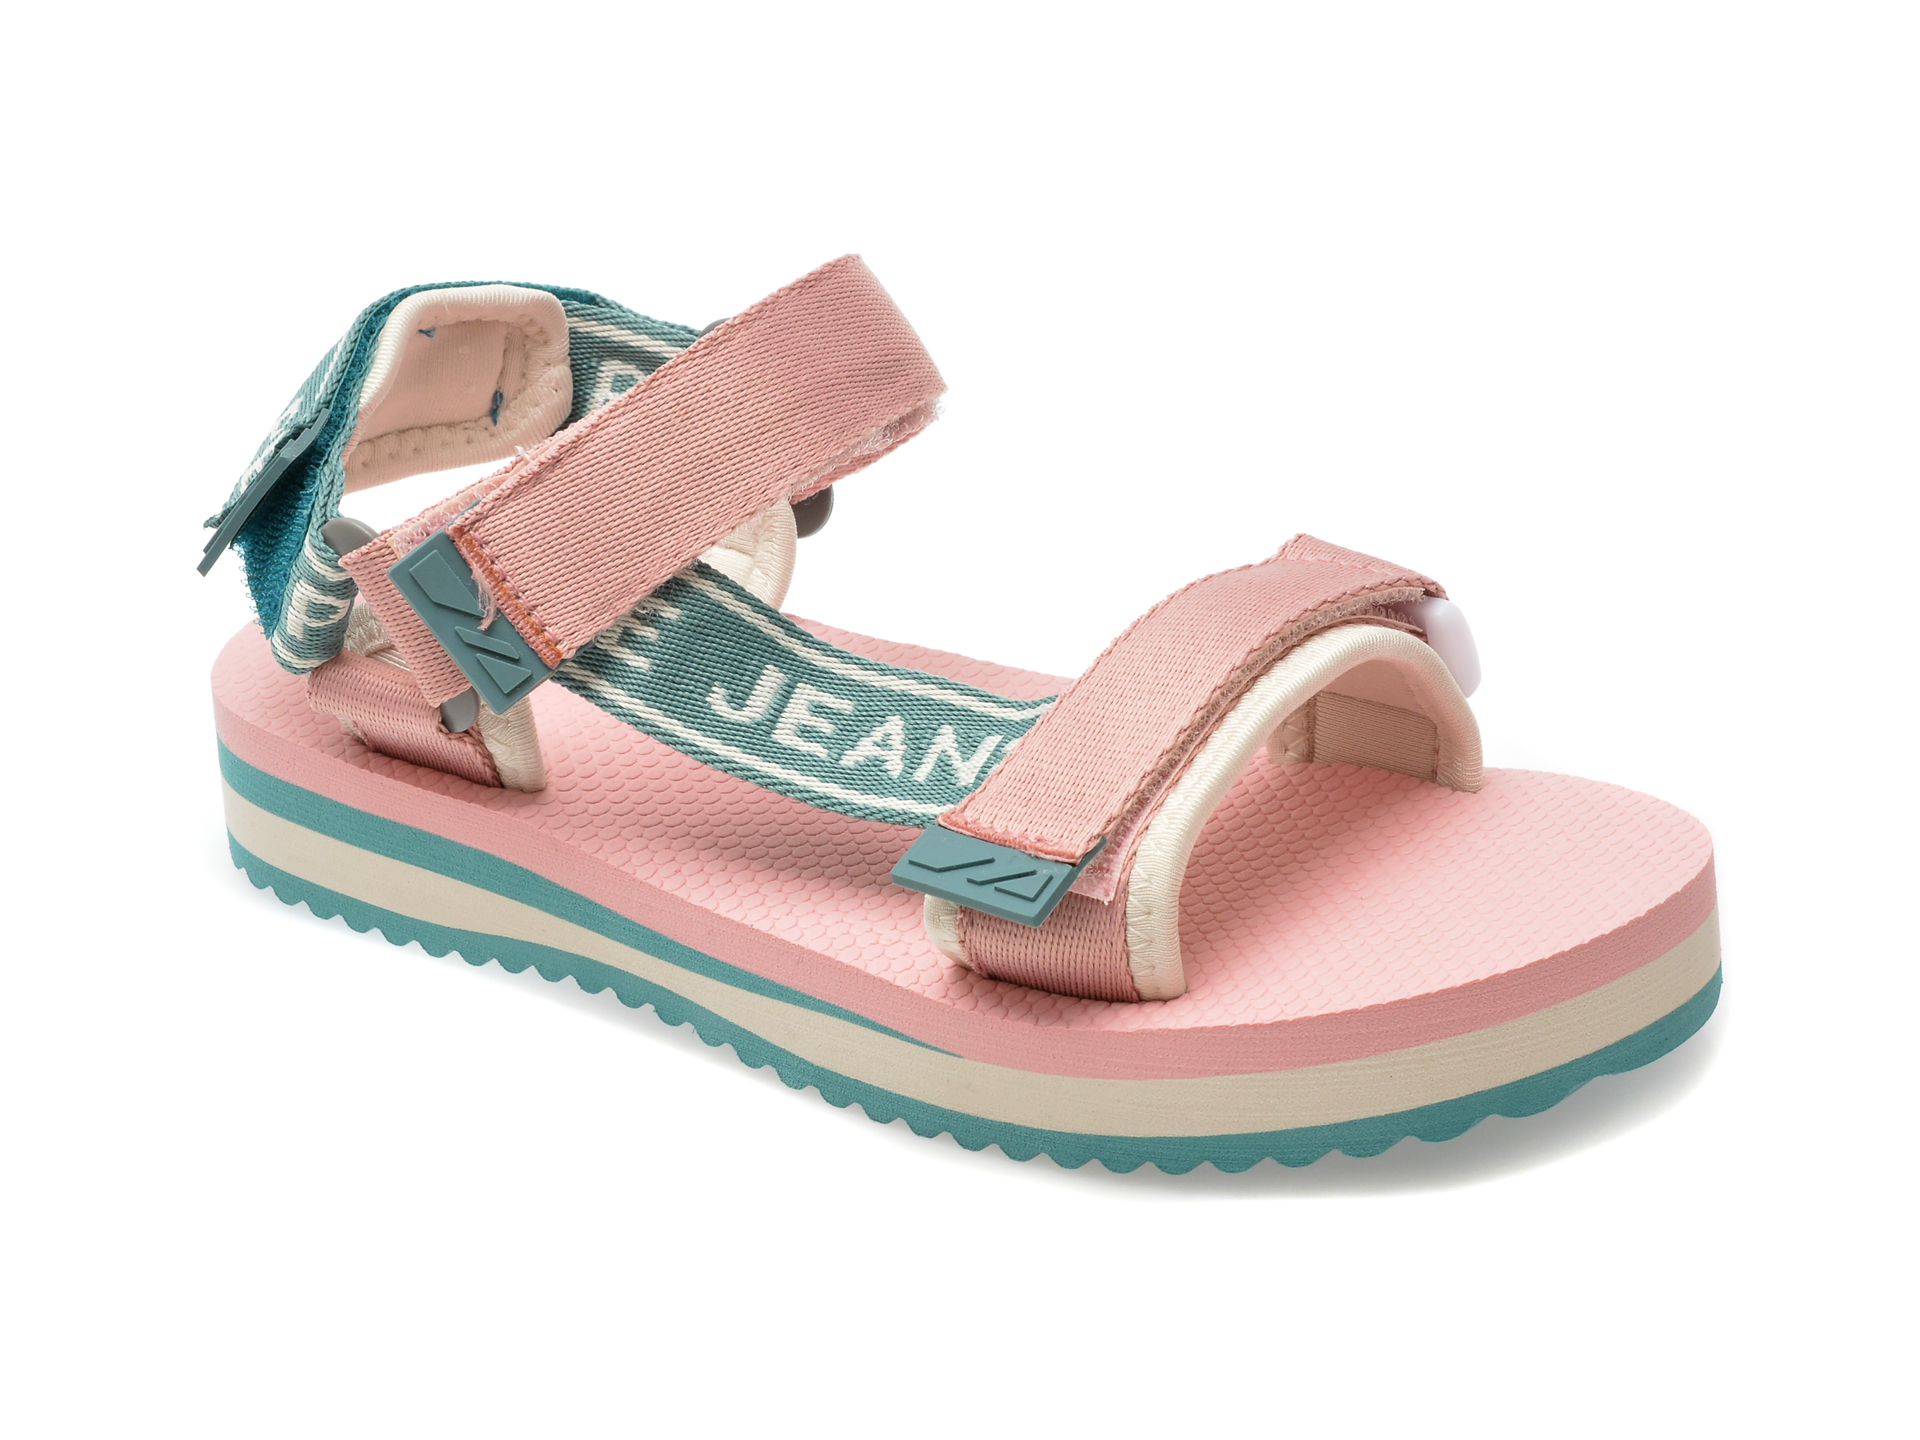 Sandale casual PEPE JEANS roz, GS70060, din material textil